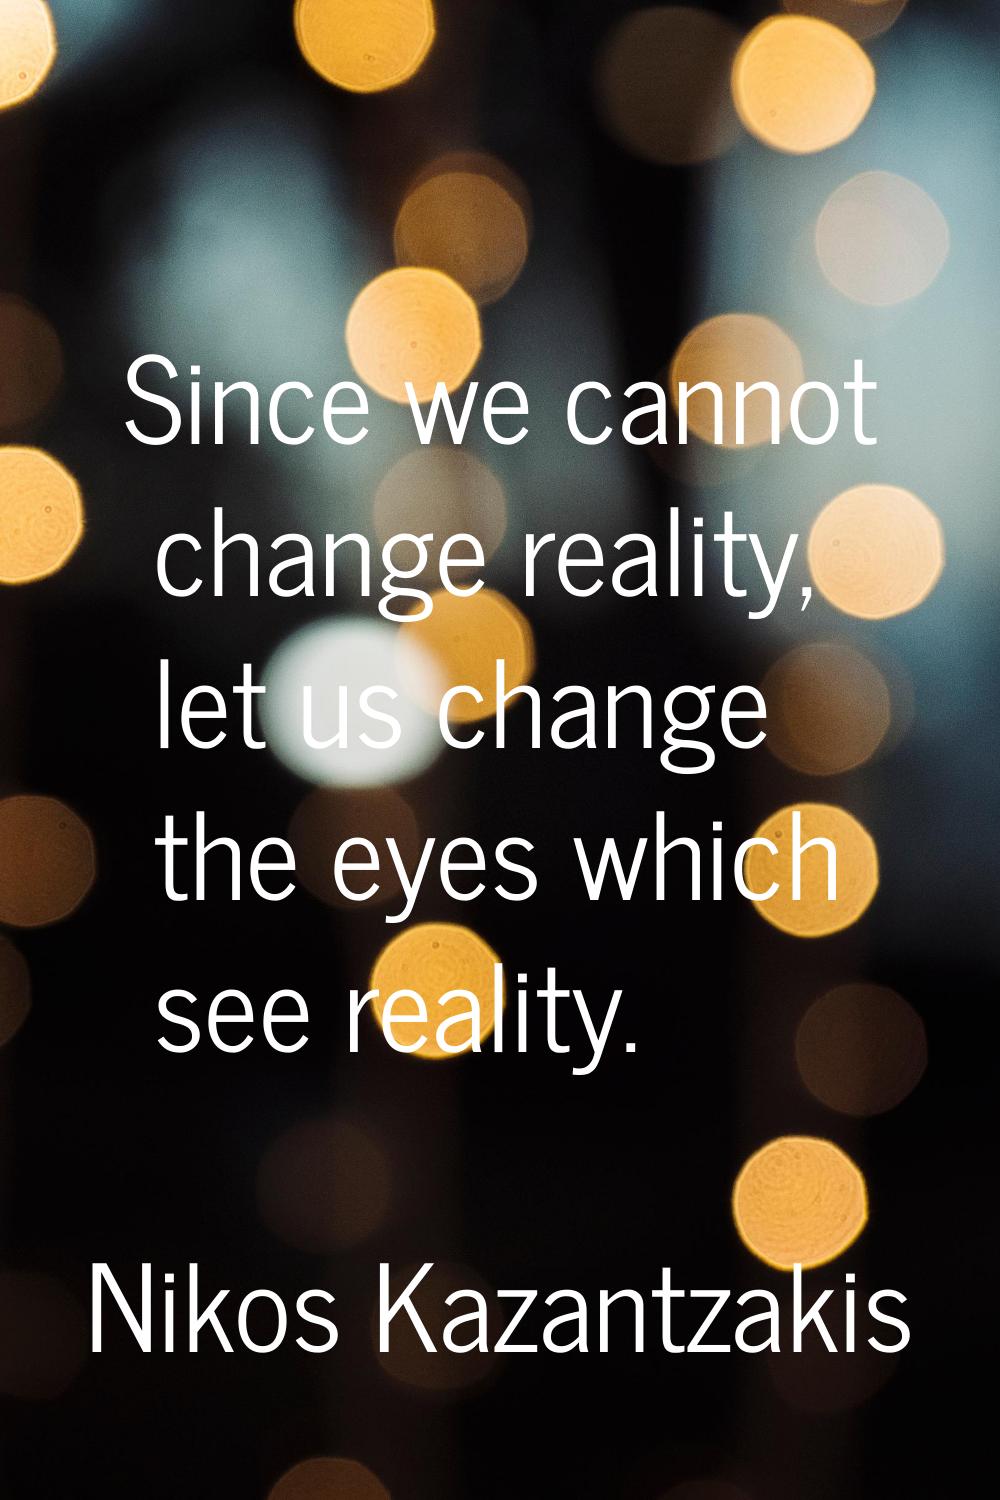 Since we cannot change reality, let us change the eyes which see reality.